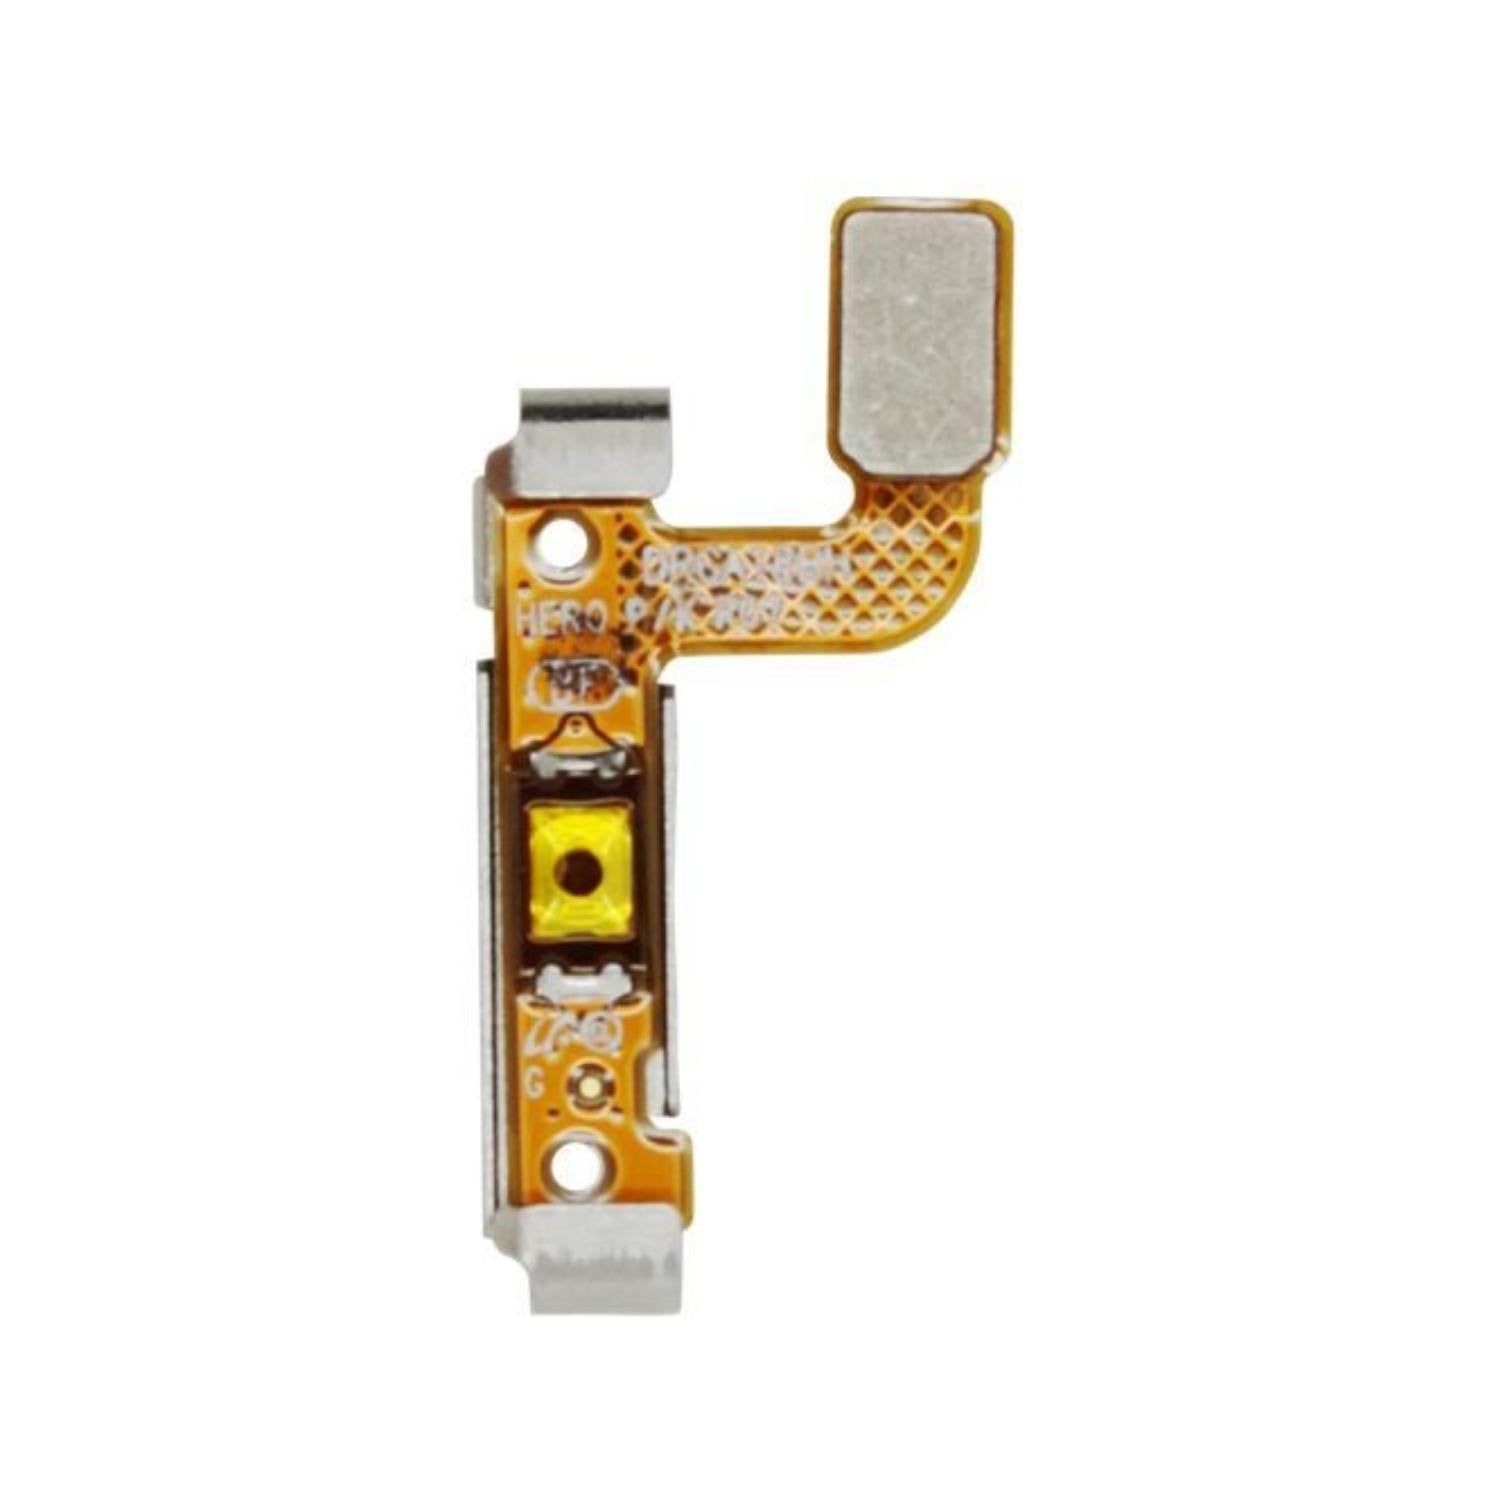 Power Button Flex Cable for Samsung Galaxy S7 / S7 Edge